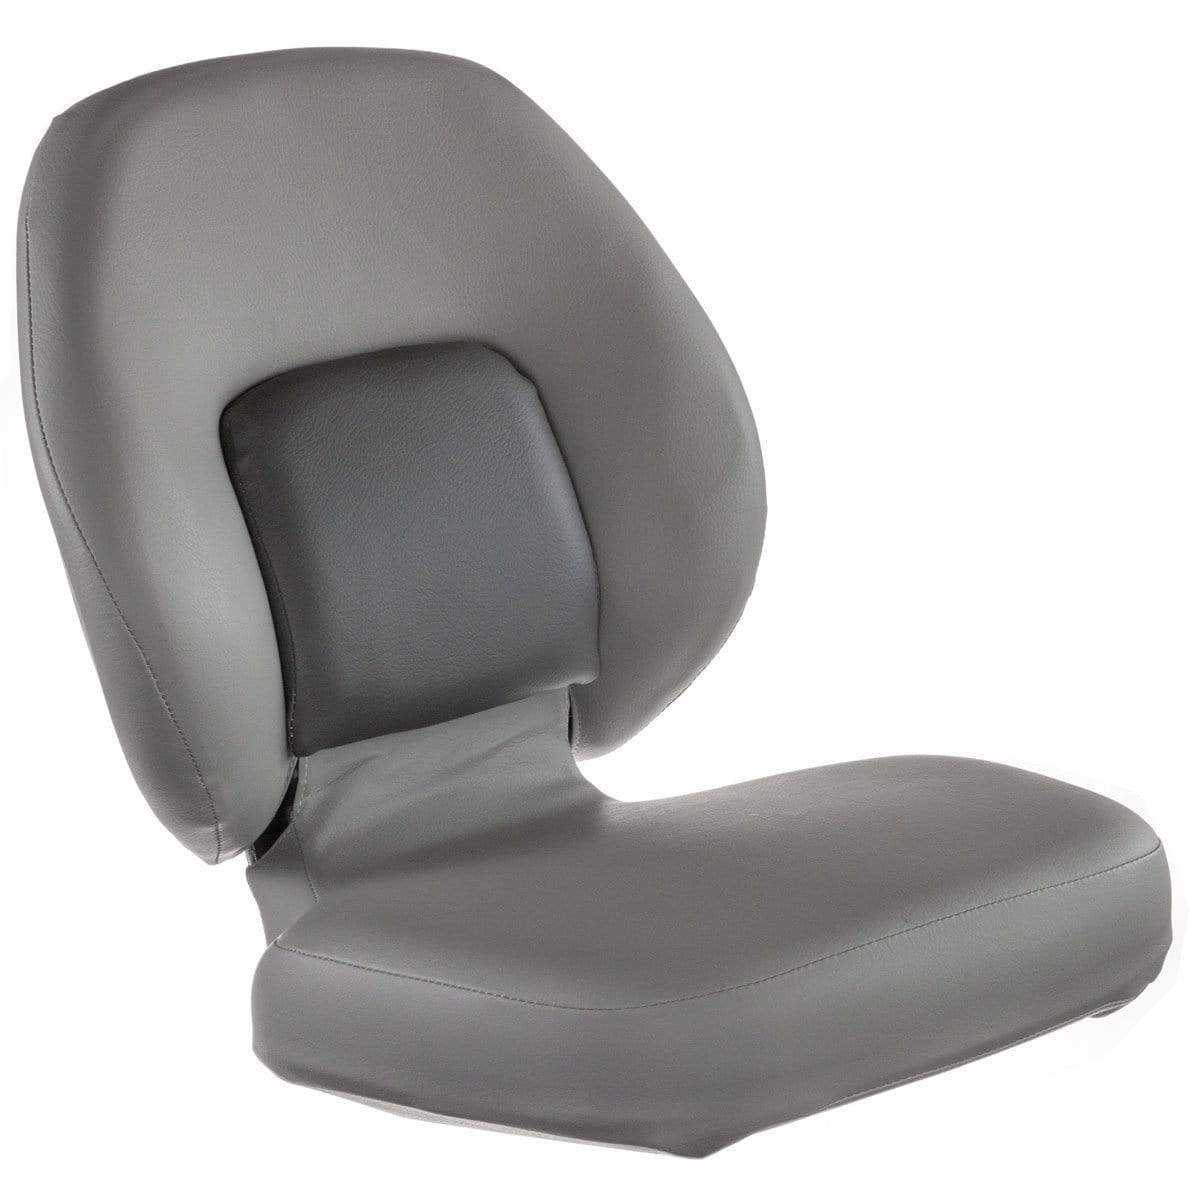 Attwood Marine Oversized - Not Qualified for Free Shipping Attwood Marine Classic Seat Comfortable Gray #98386-2